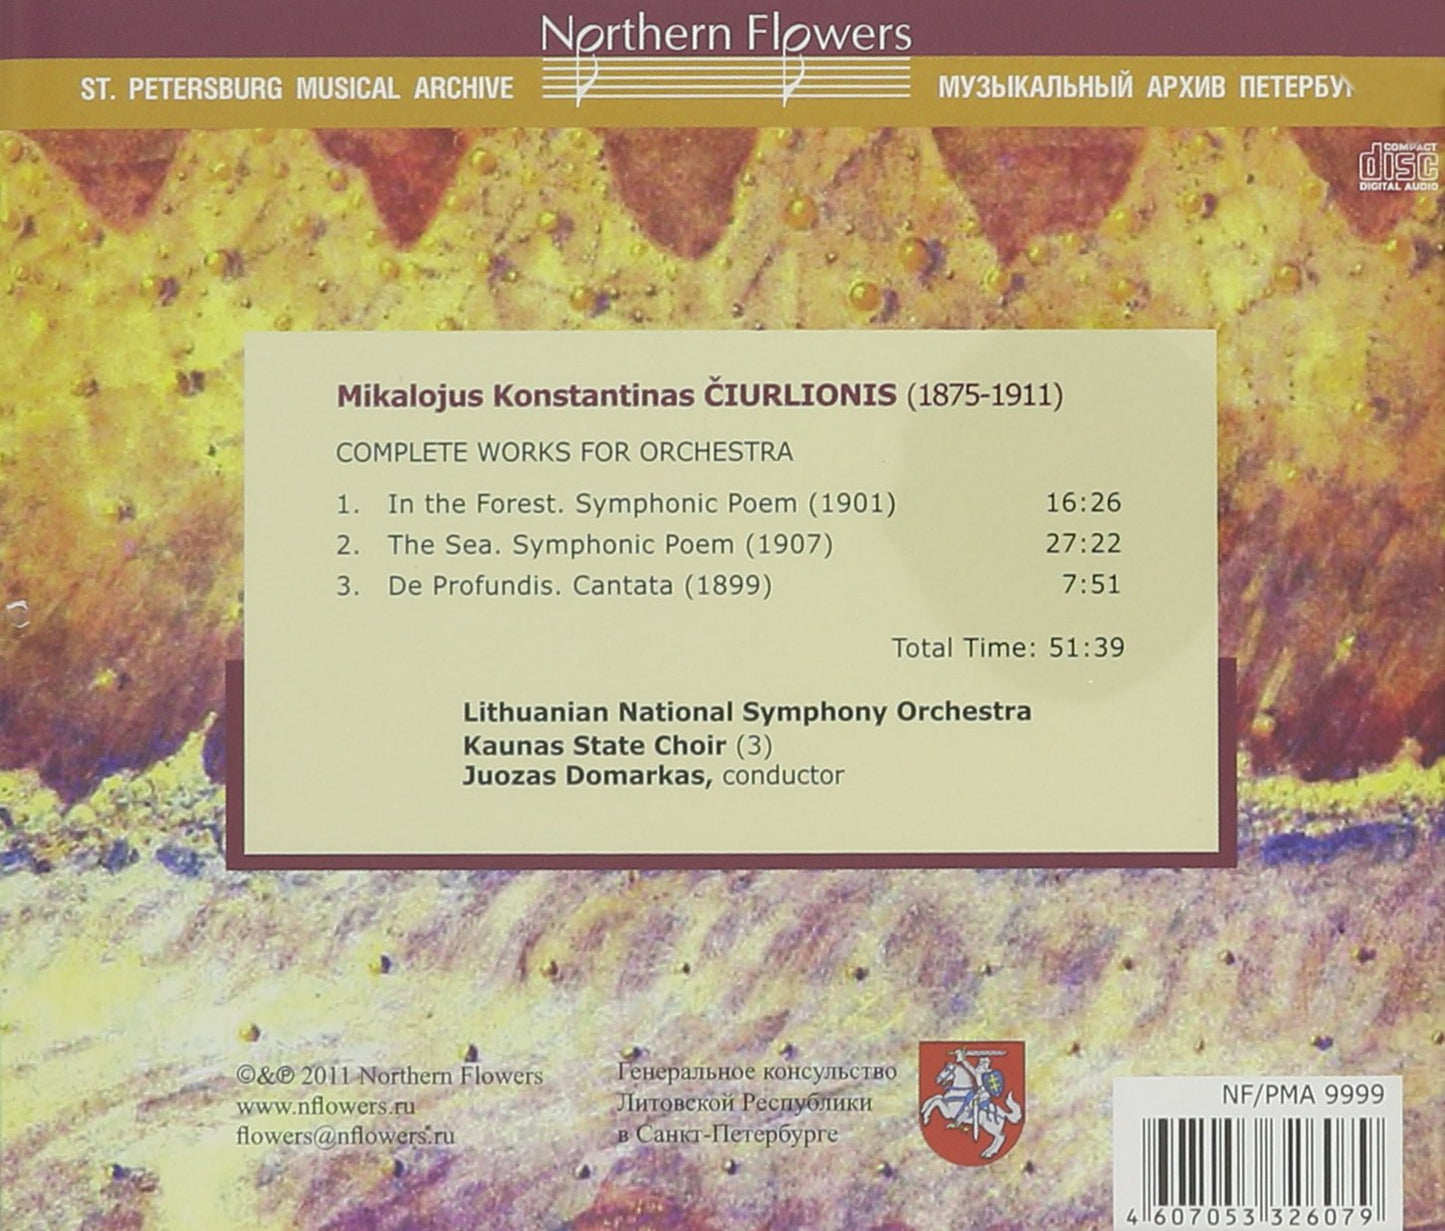 CIURLIONIS: COMPLETE WORKS FOR ORCHESTRA - LITHUANIAN NATIONAL SYMPHONY ORCHESTRA